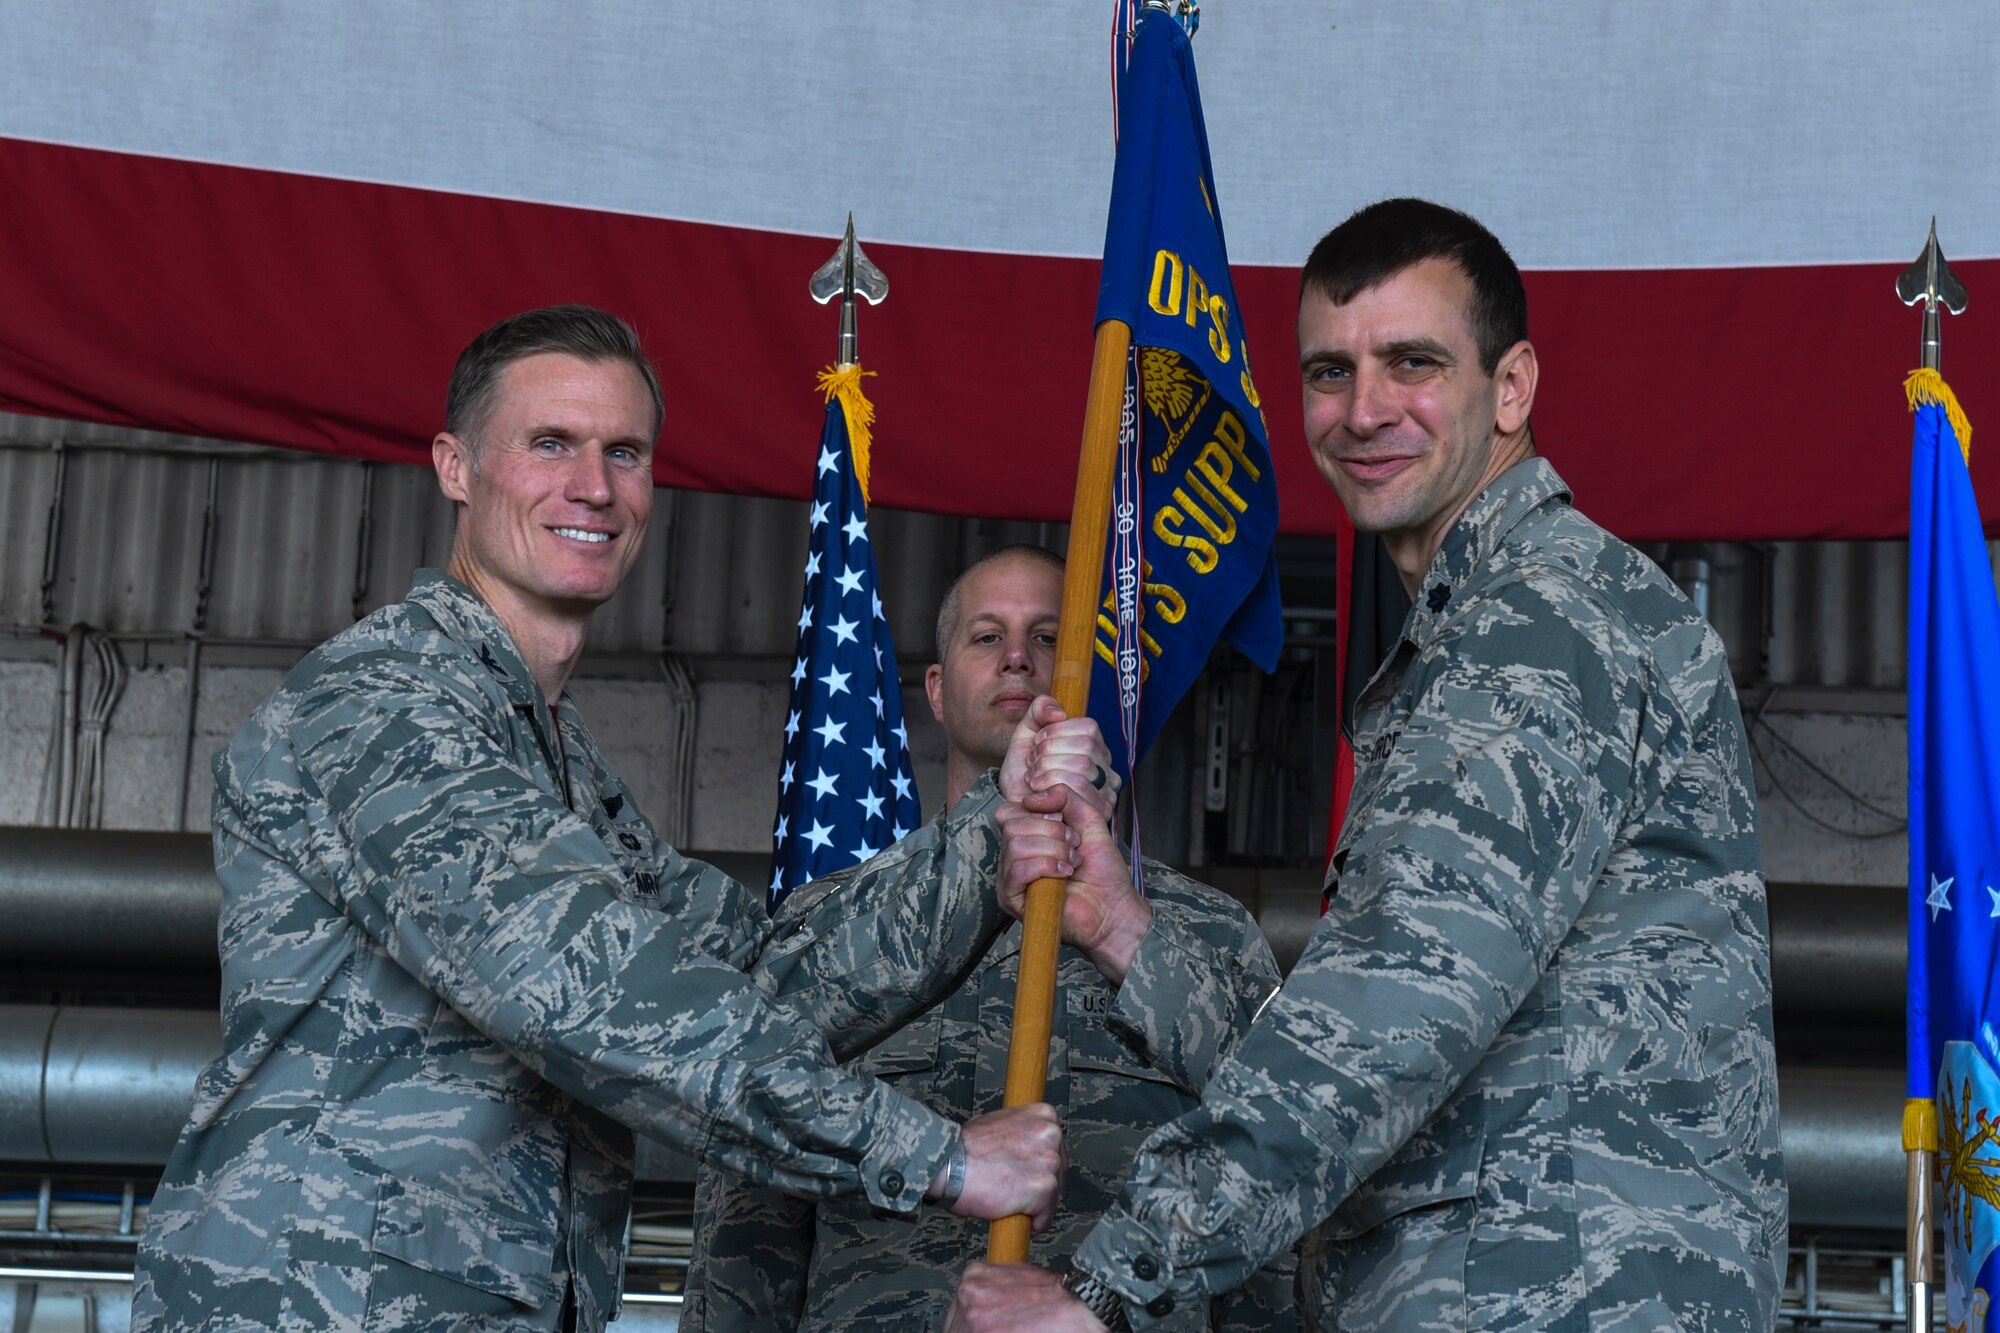 U.S. Air Force Col. Michael Thompson, 52nd Operations Group commander, left, gives the ceremonial guidon to U.S. Air Force Lt. Col. Joshua Kubacz, incoming 52nd Operations Support Squadron commander, during the 52nd OSS change of command ceremony on Spangdahlem Air Base, Germany, May 19, 2017. (U.S. Air Force photo by Senior Airman Dawn M. Weber)